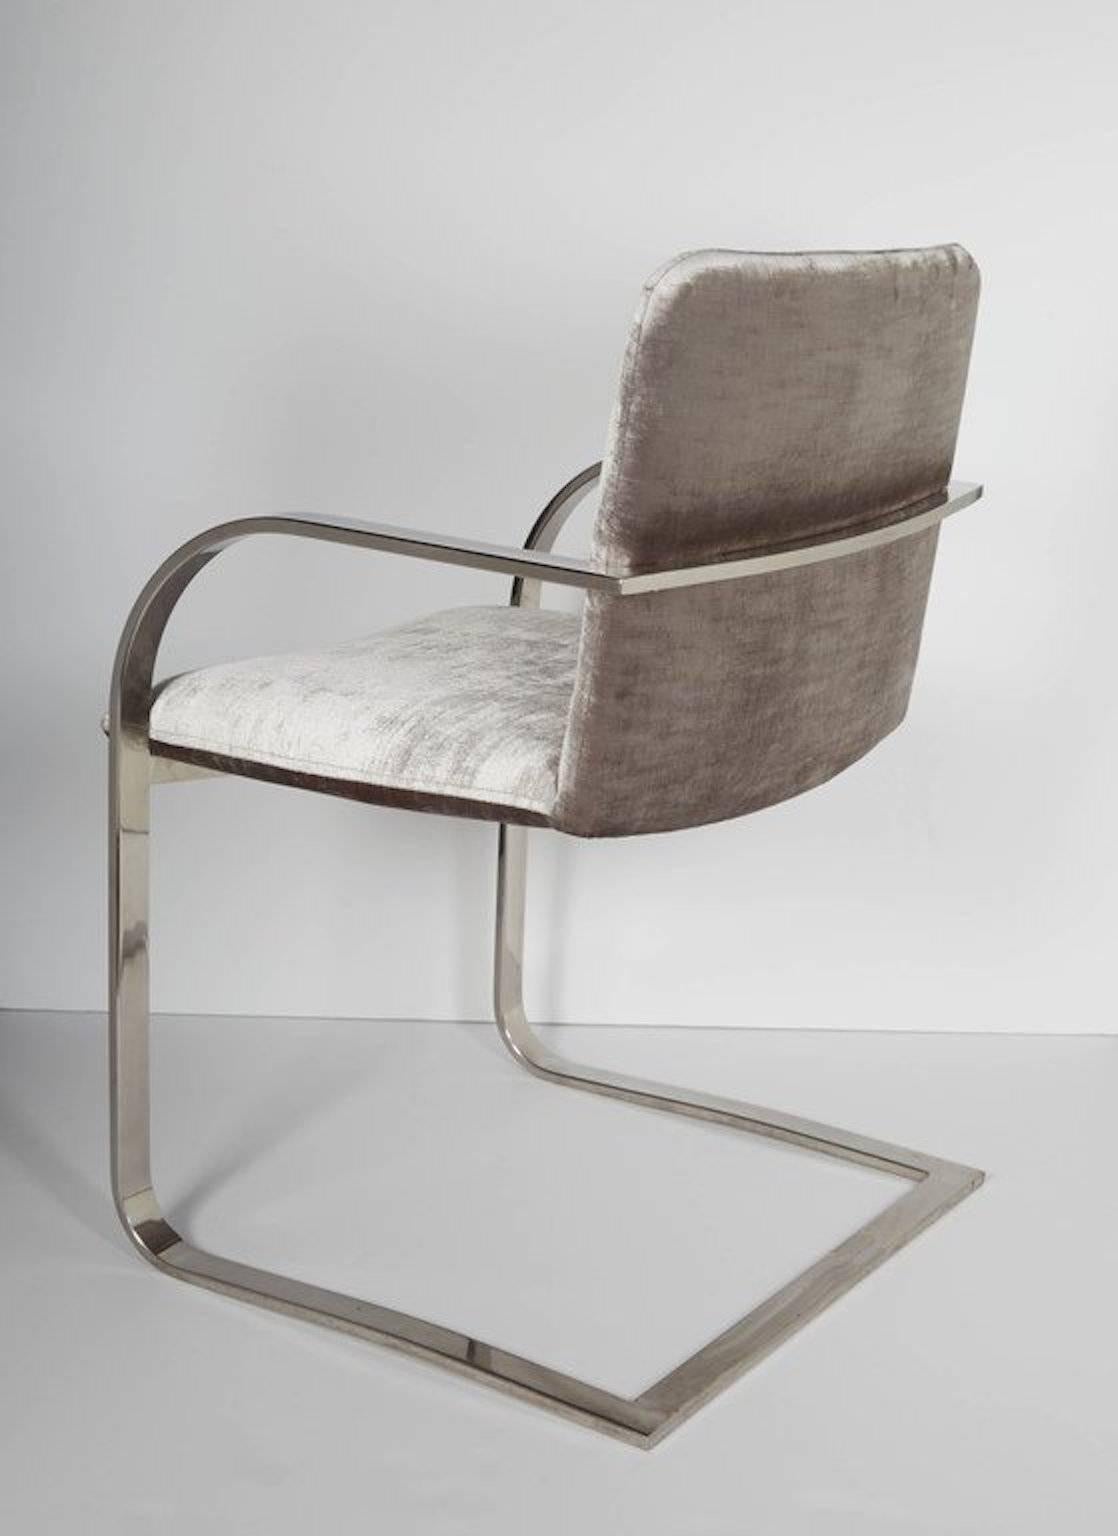 Mid-Century Modern desk chair with cantilevered frame design. Chair has streamlined profile with curved armrests and floating seat details. The chair is made of a polished steel frame. Newly upholstered in luxe platinum silver grey velvet-cotton